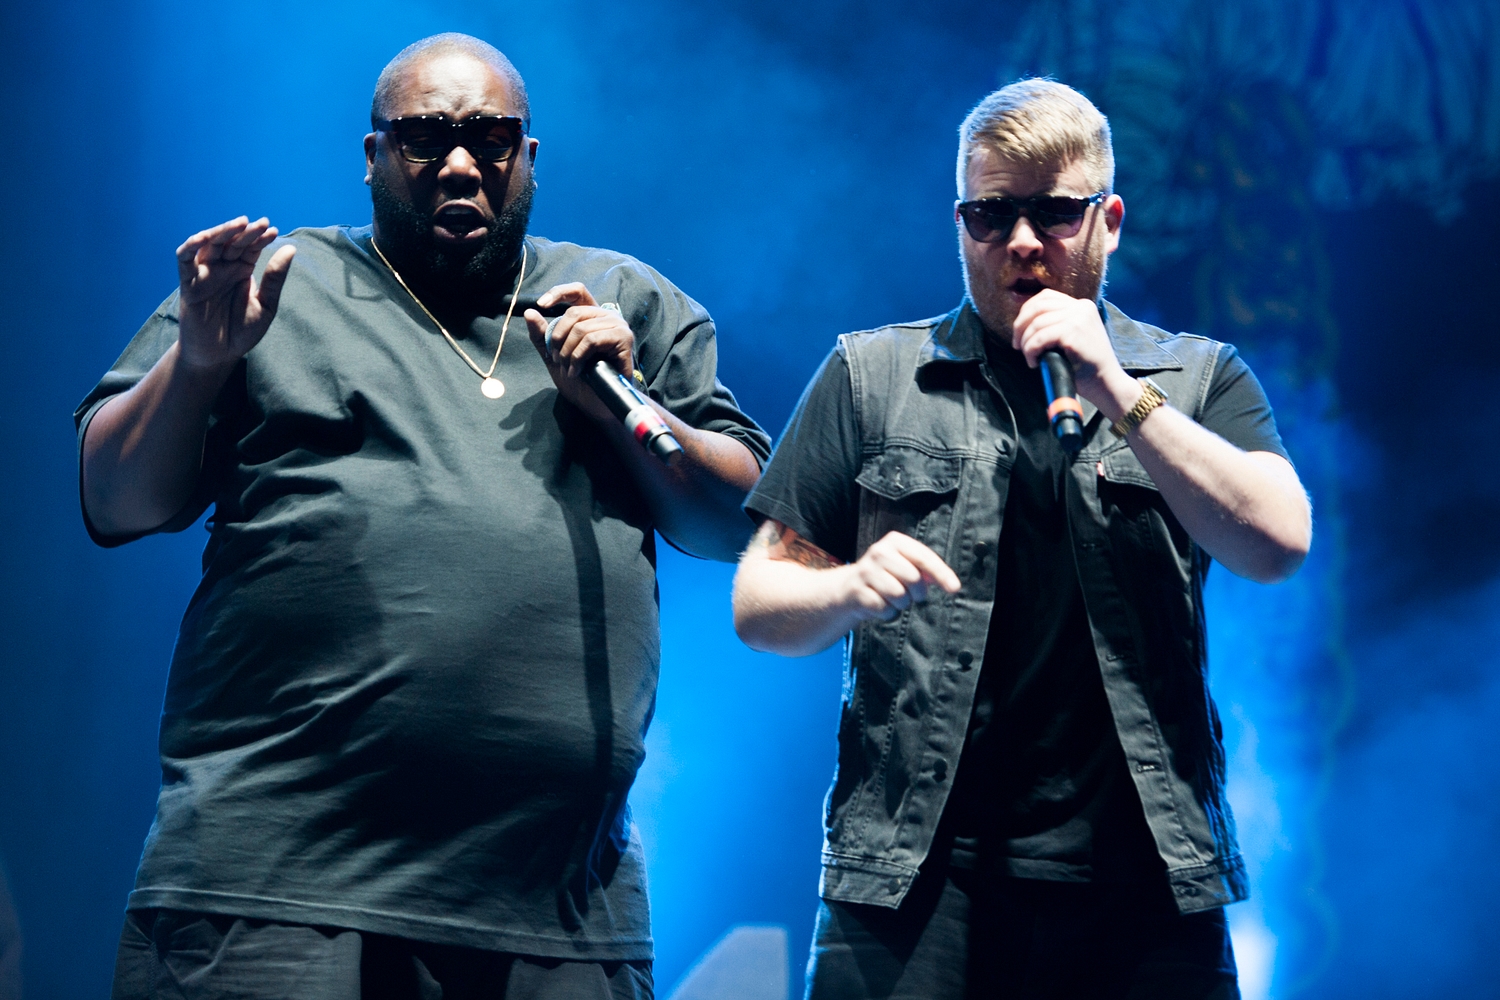 Meow The Jewels is here: listen to Run The Jewels’ cat-themed ‘Oh My Darling Don’t Meow’ now